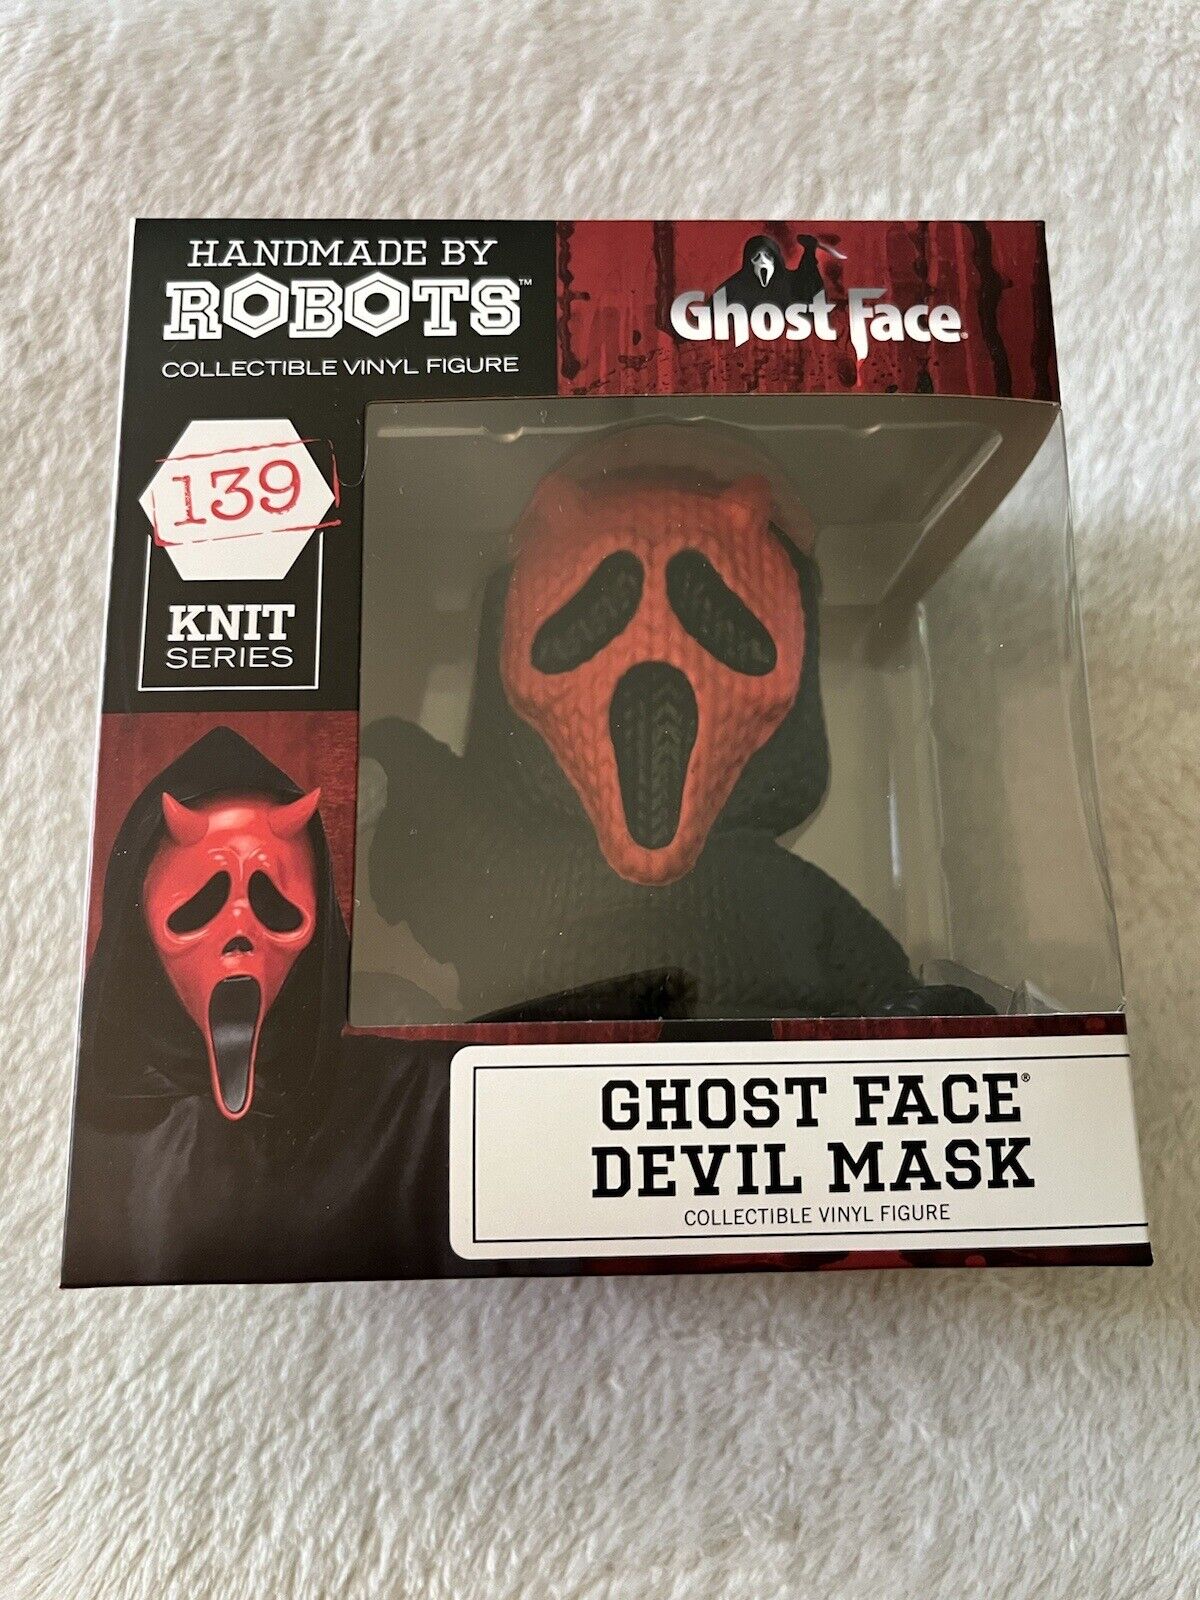 Ghost Face Devil Mask #139 By Handmade By Robots. Ghostface